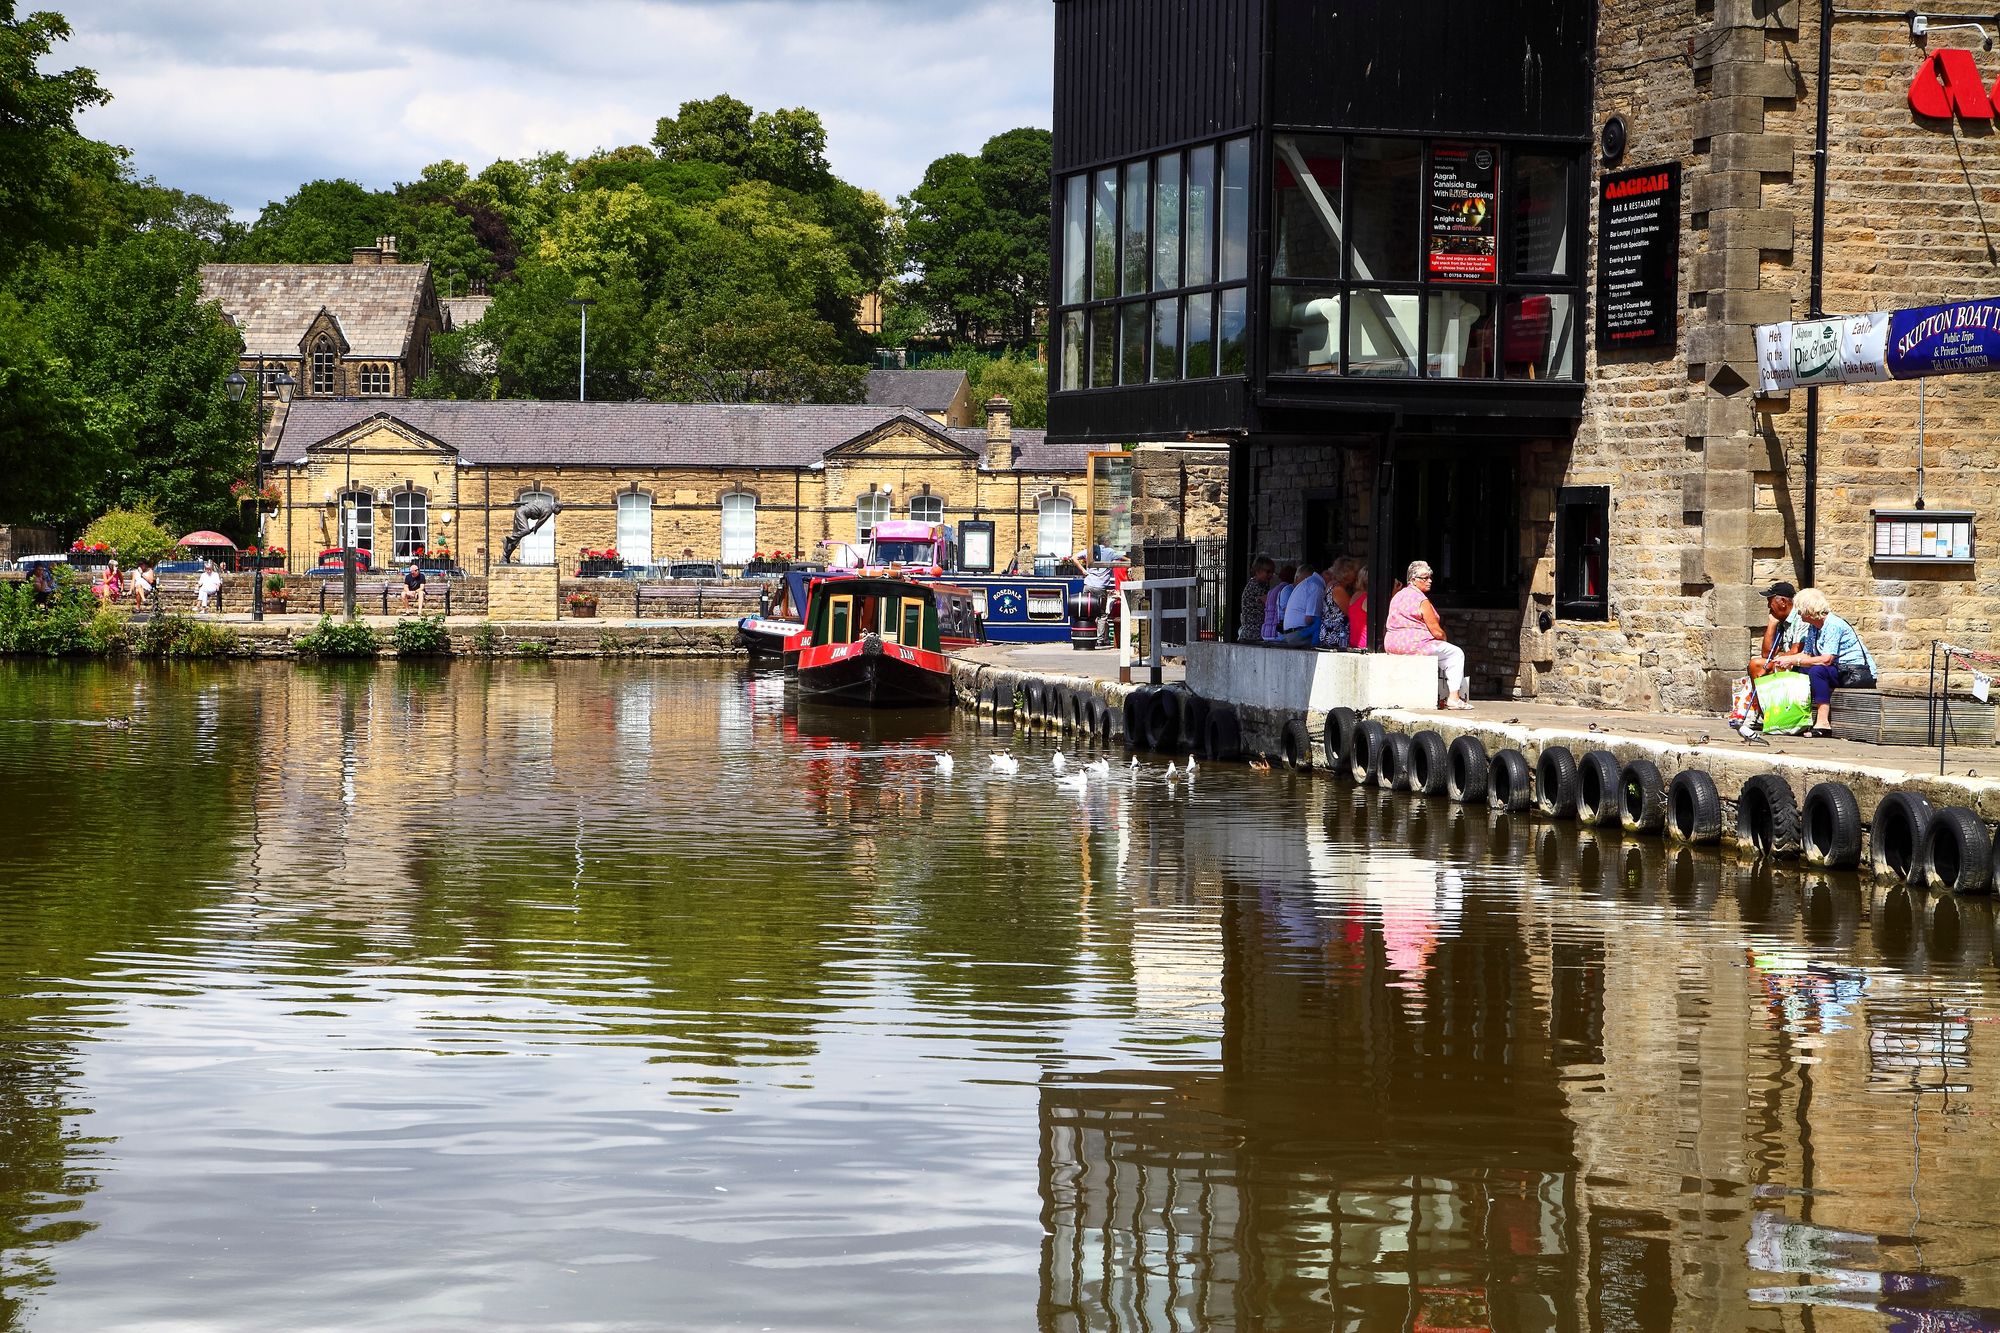 Leeds-Liverpool canal in skipton